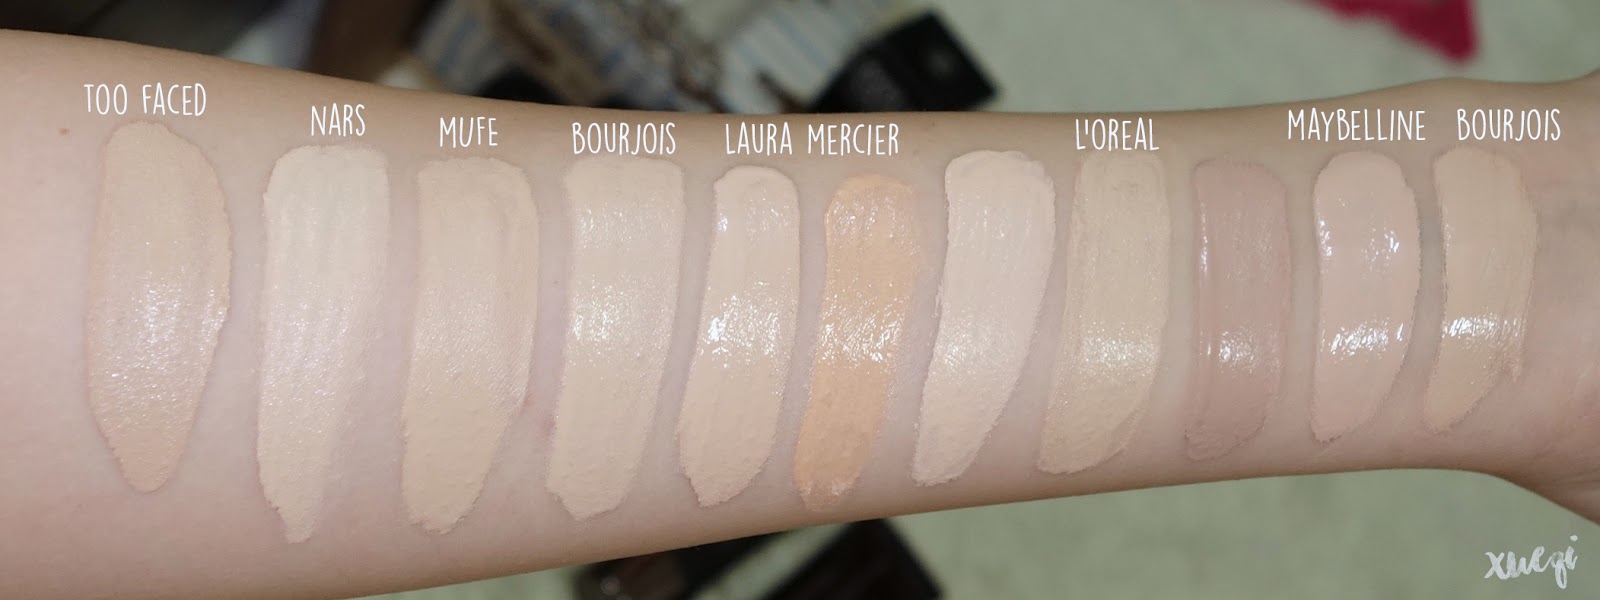 Nars Sheer Glow Foundation Color Chart